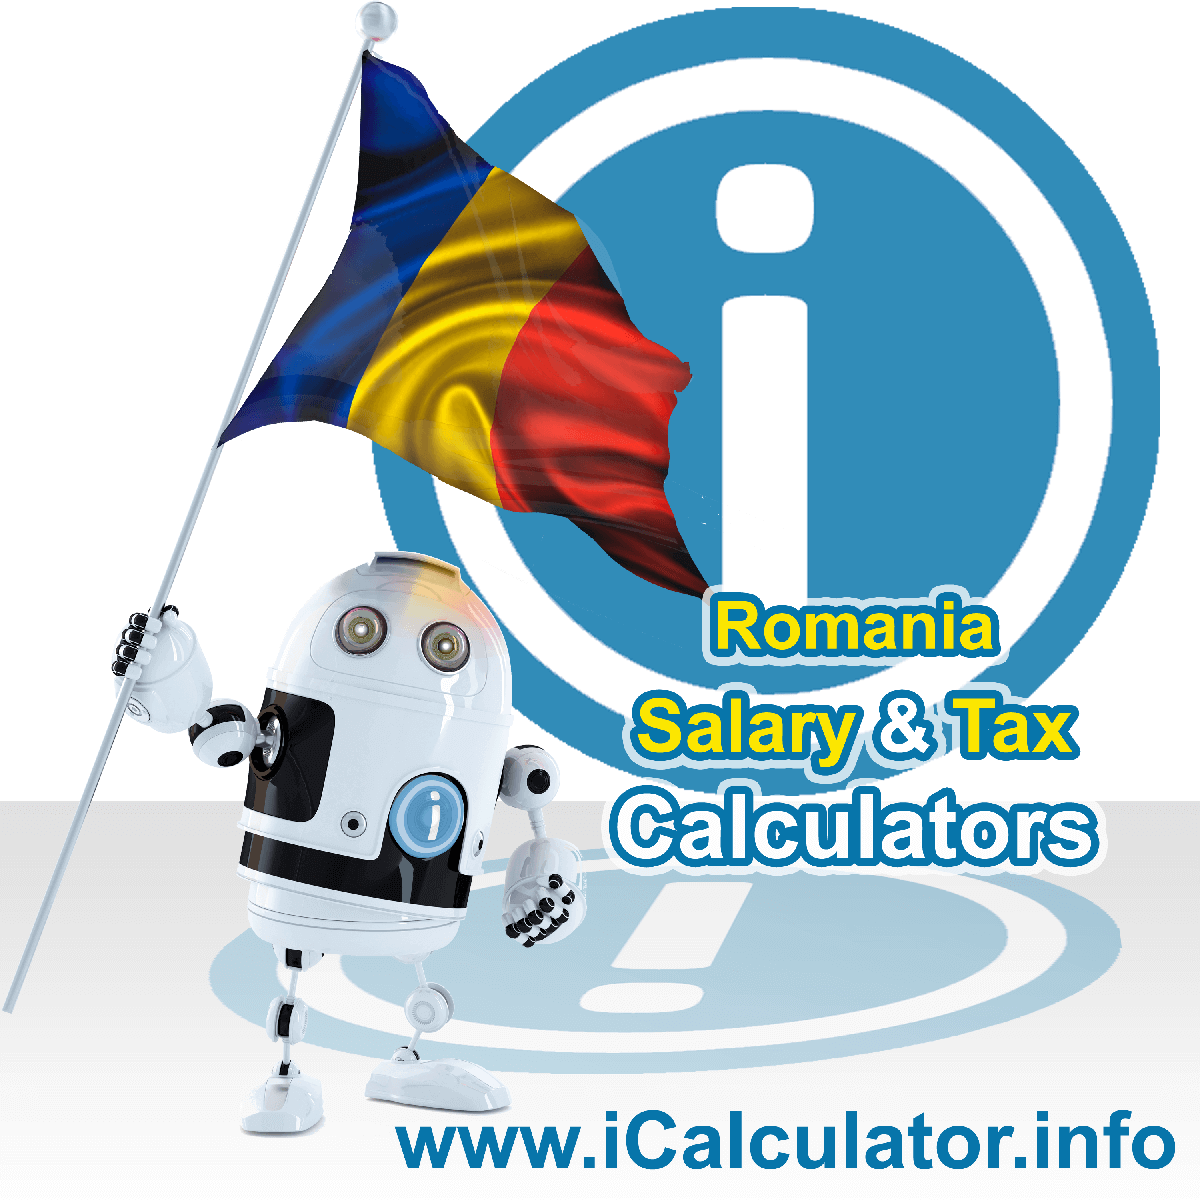 Romania Tax Calculator. This image shows the Romania flag and information relating to the tax formula for the Romania Salary Calculator